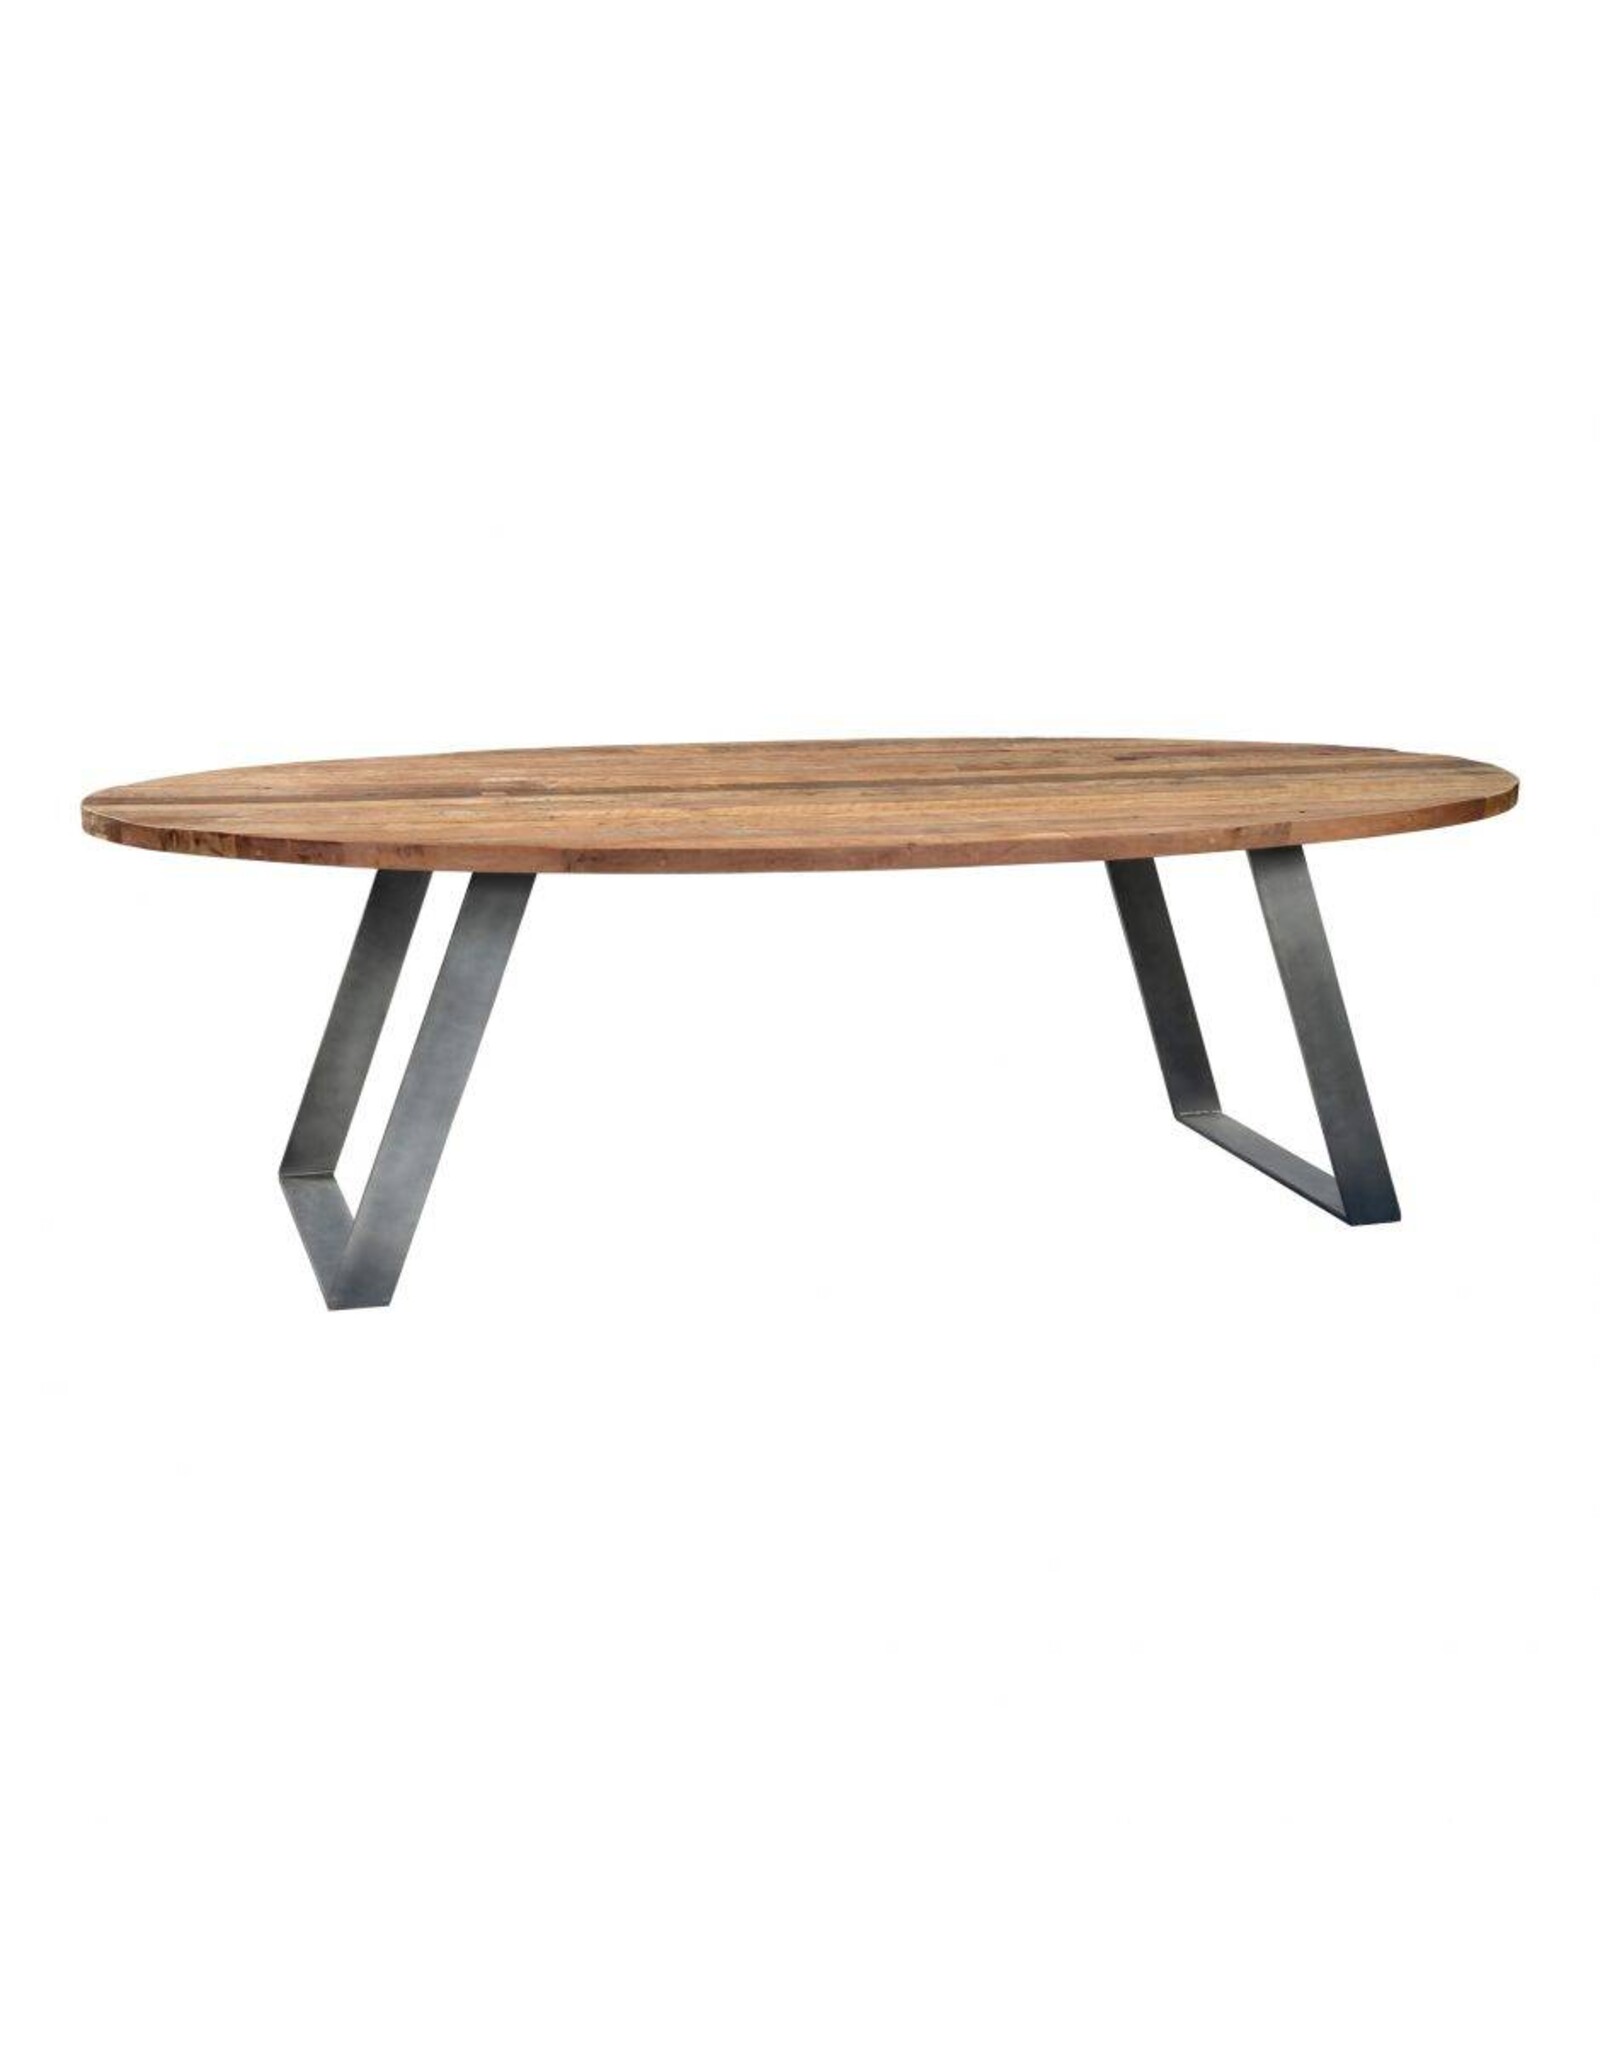 Monroe & Kent CORRAL DINING TABLE